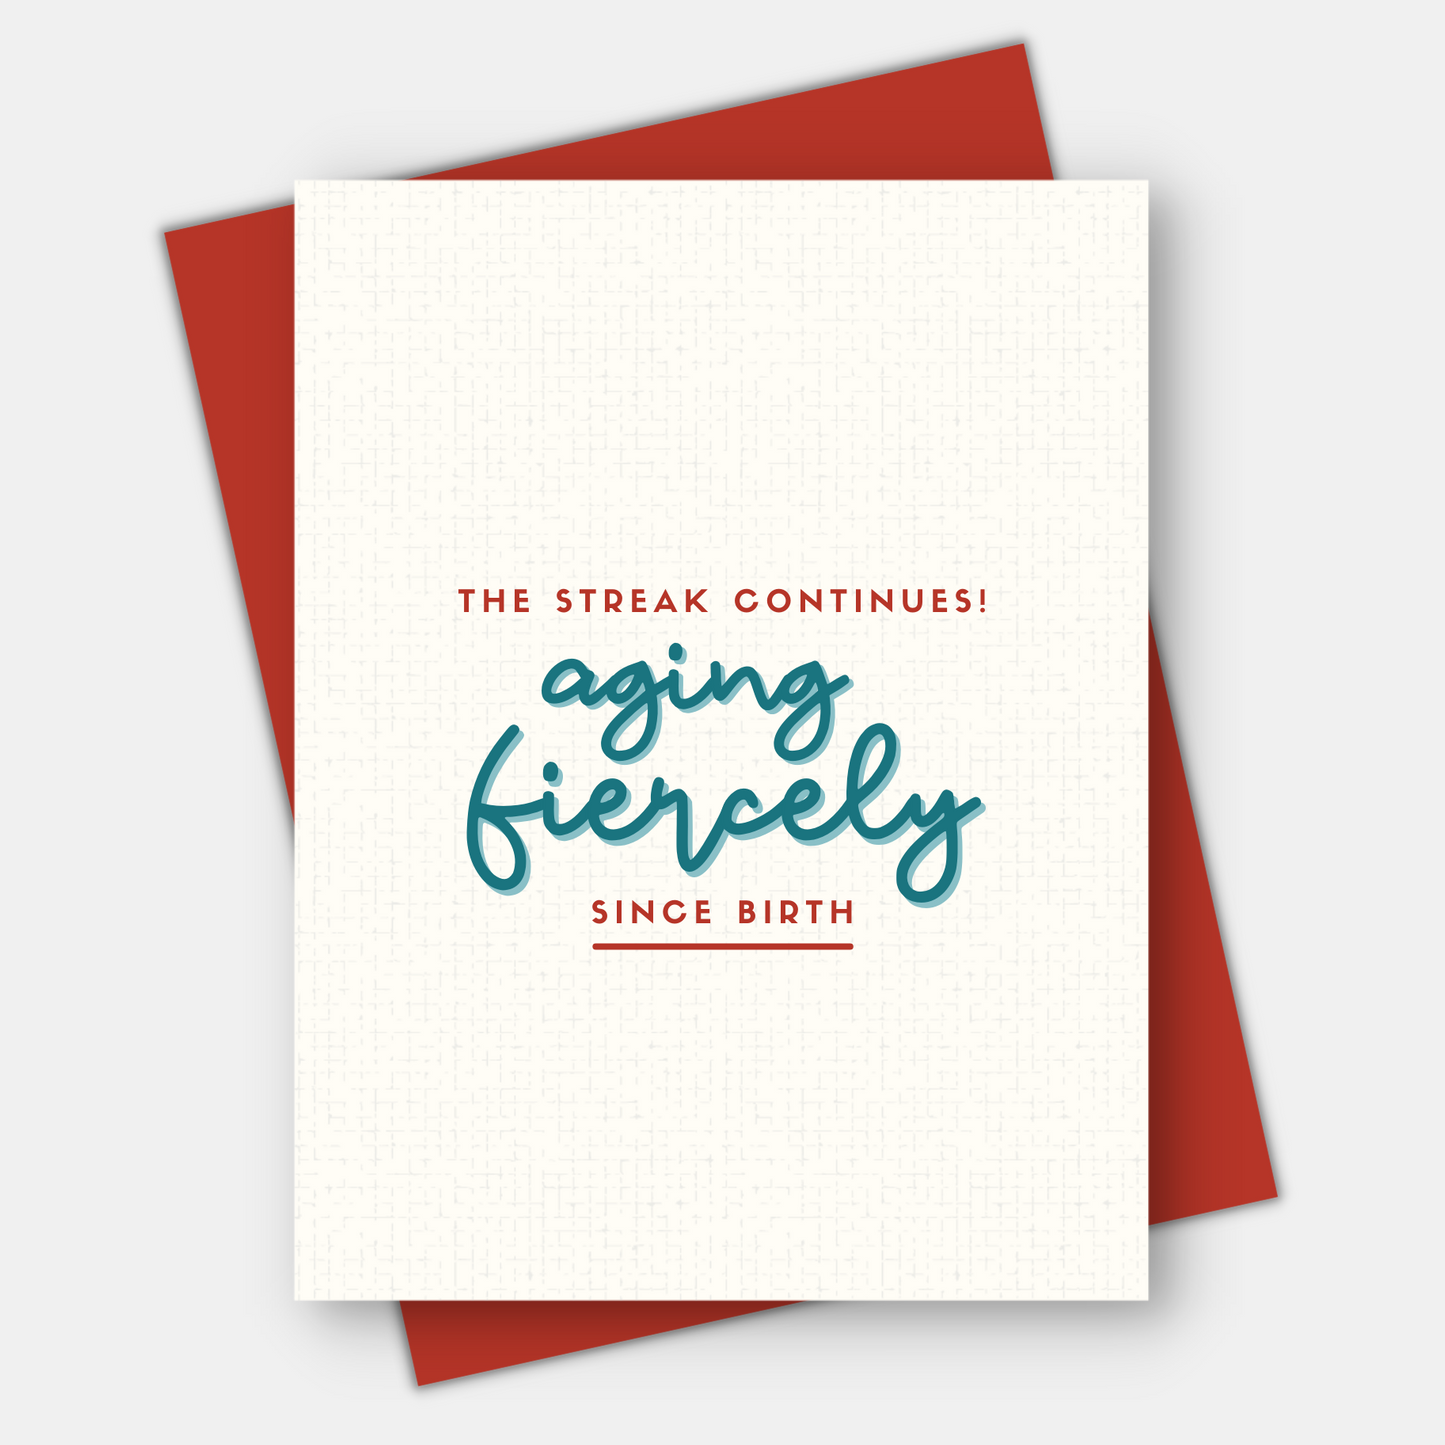 Aging Fiercely Since Birth, Age-Positive Birthday Card